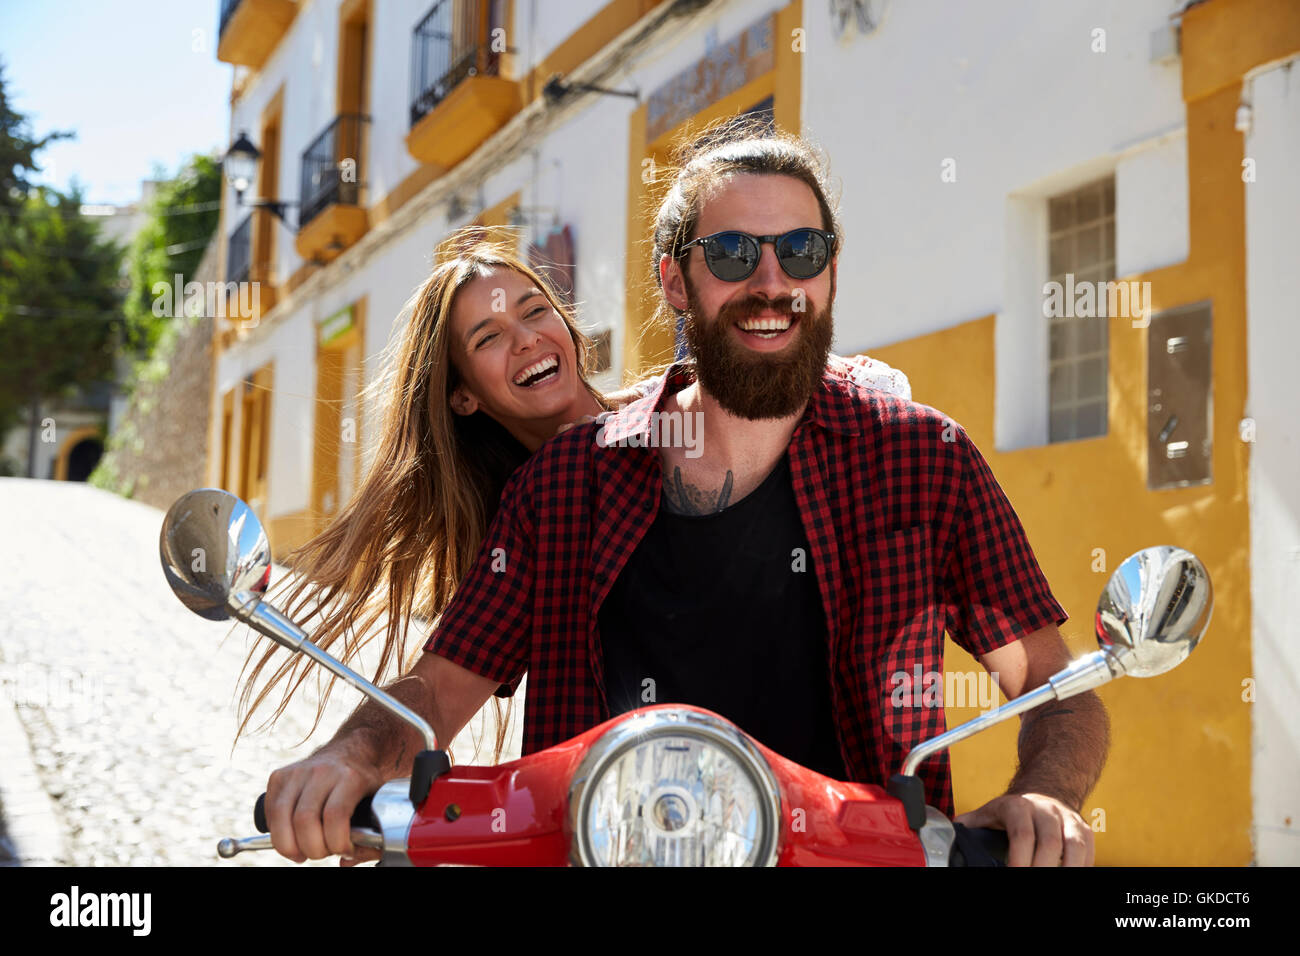 Couple sitting on a motor scooter laughing, Ibiza, Spain Stock Photo